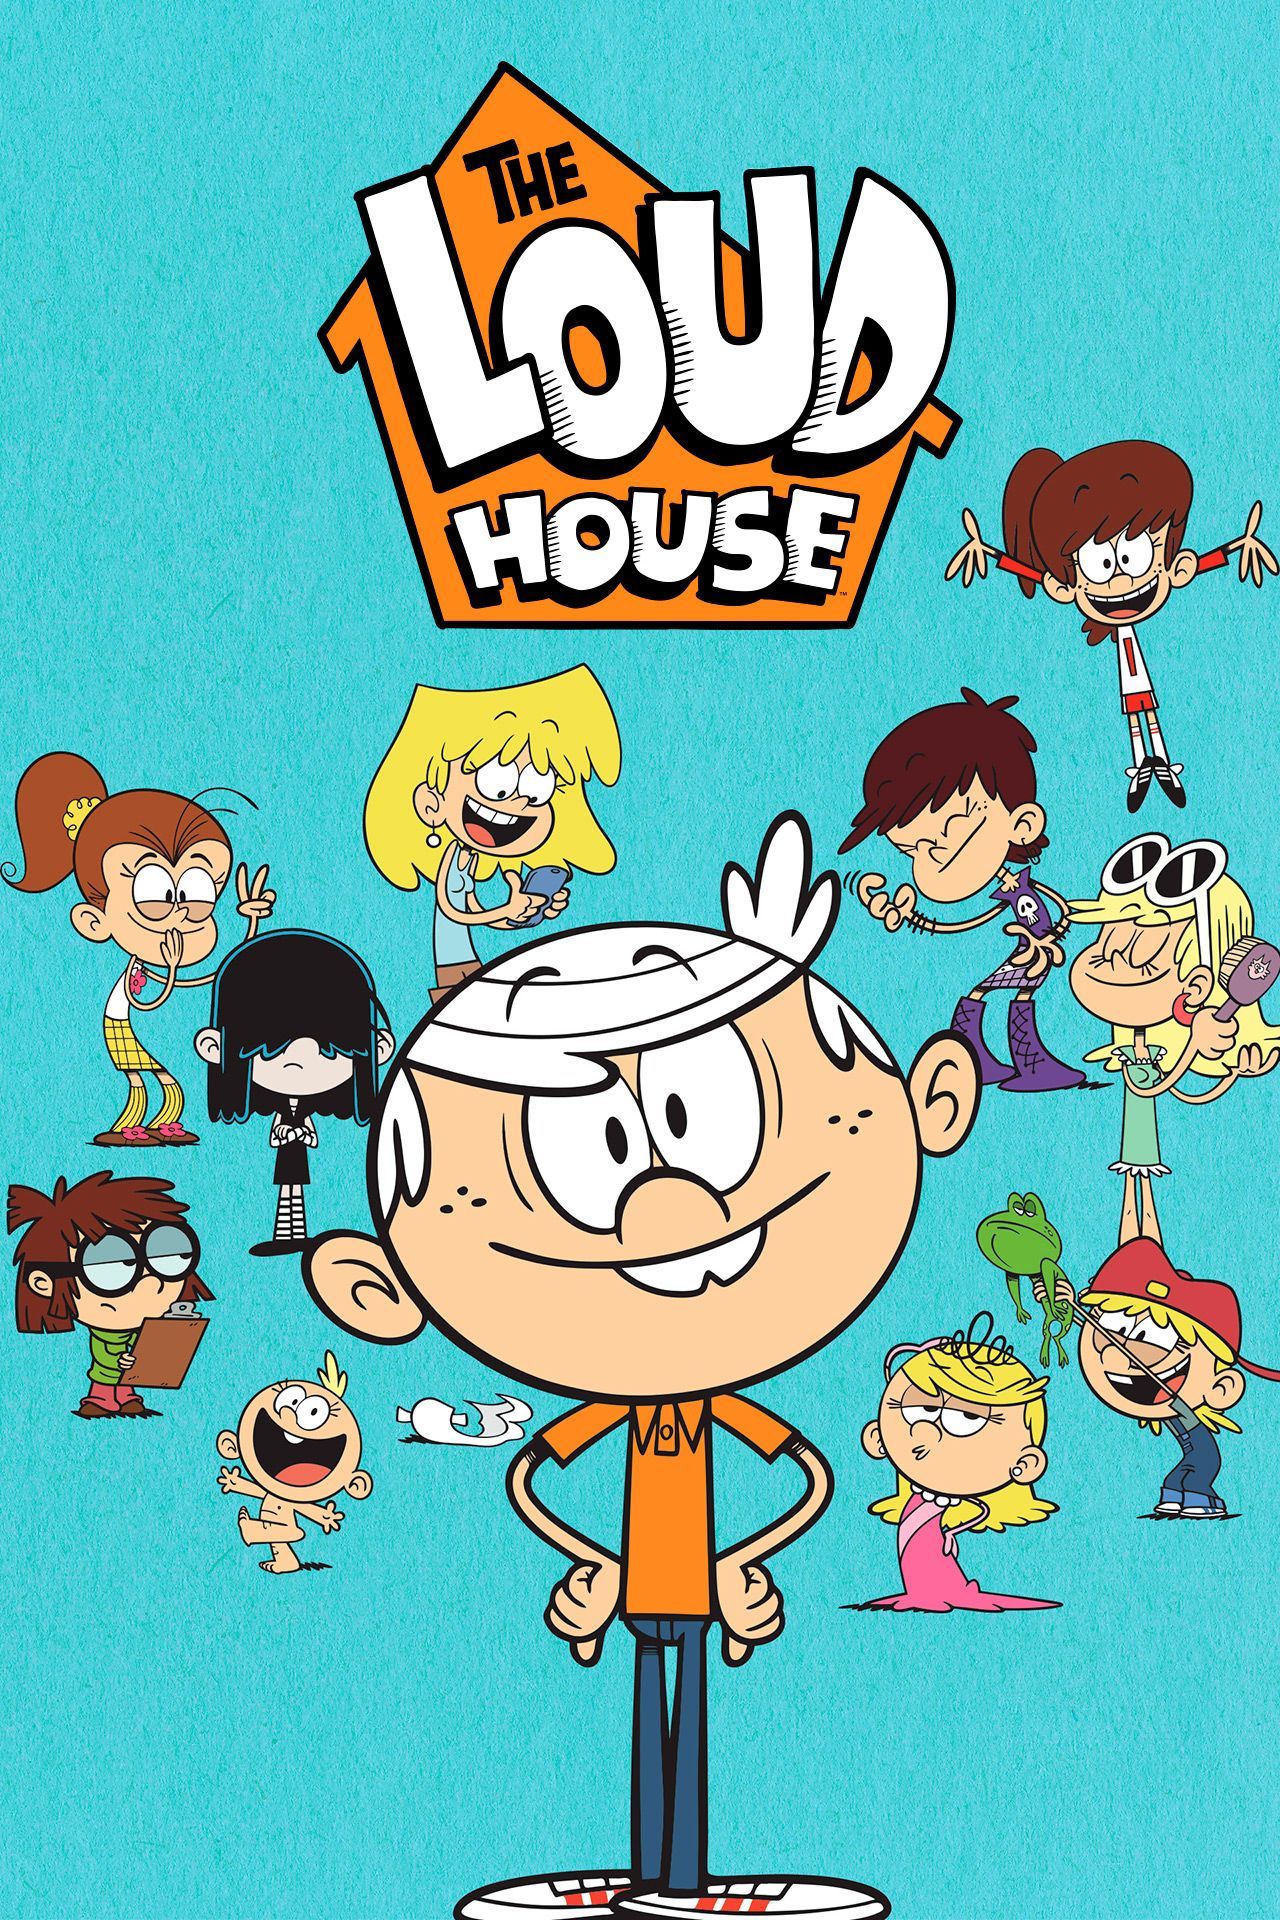 The Loud House |OT| The Most Full House | NeoGAF